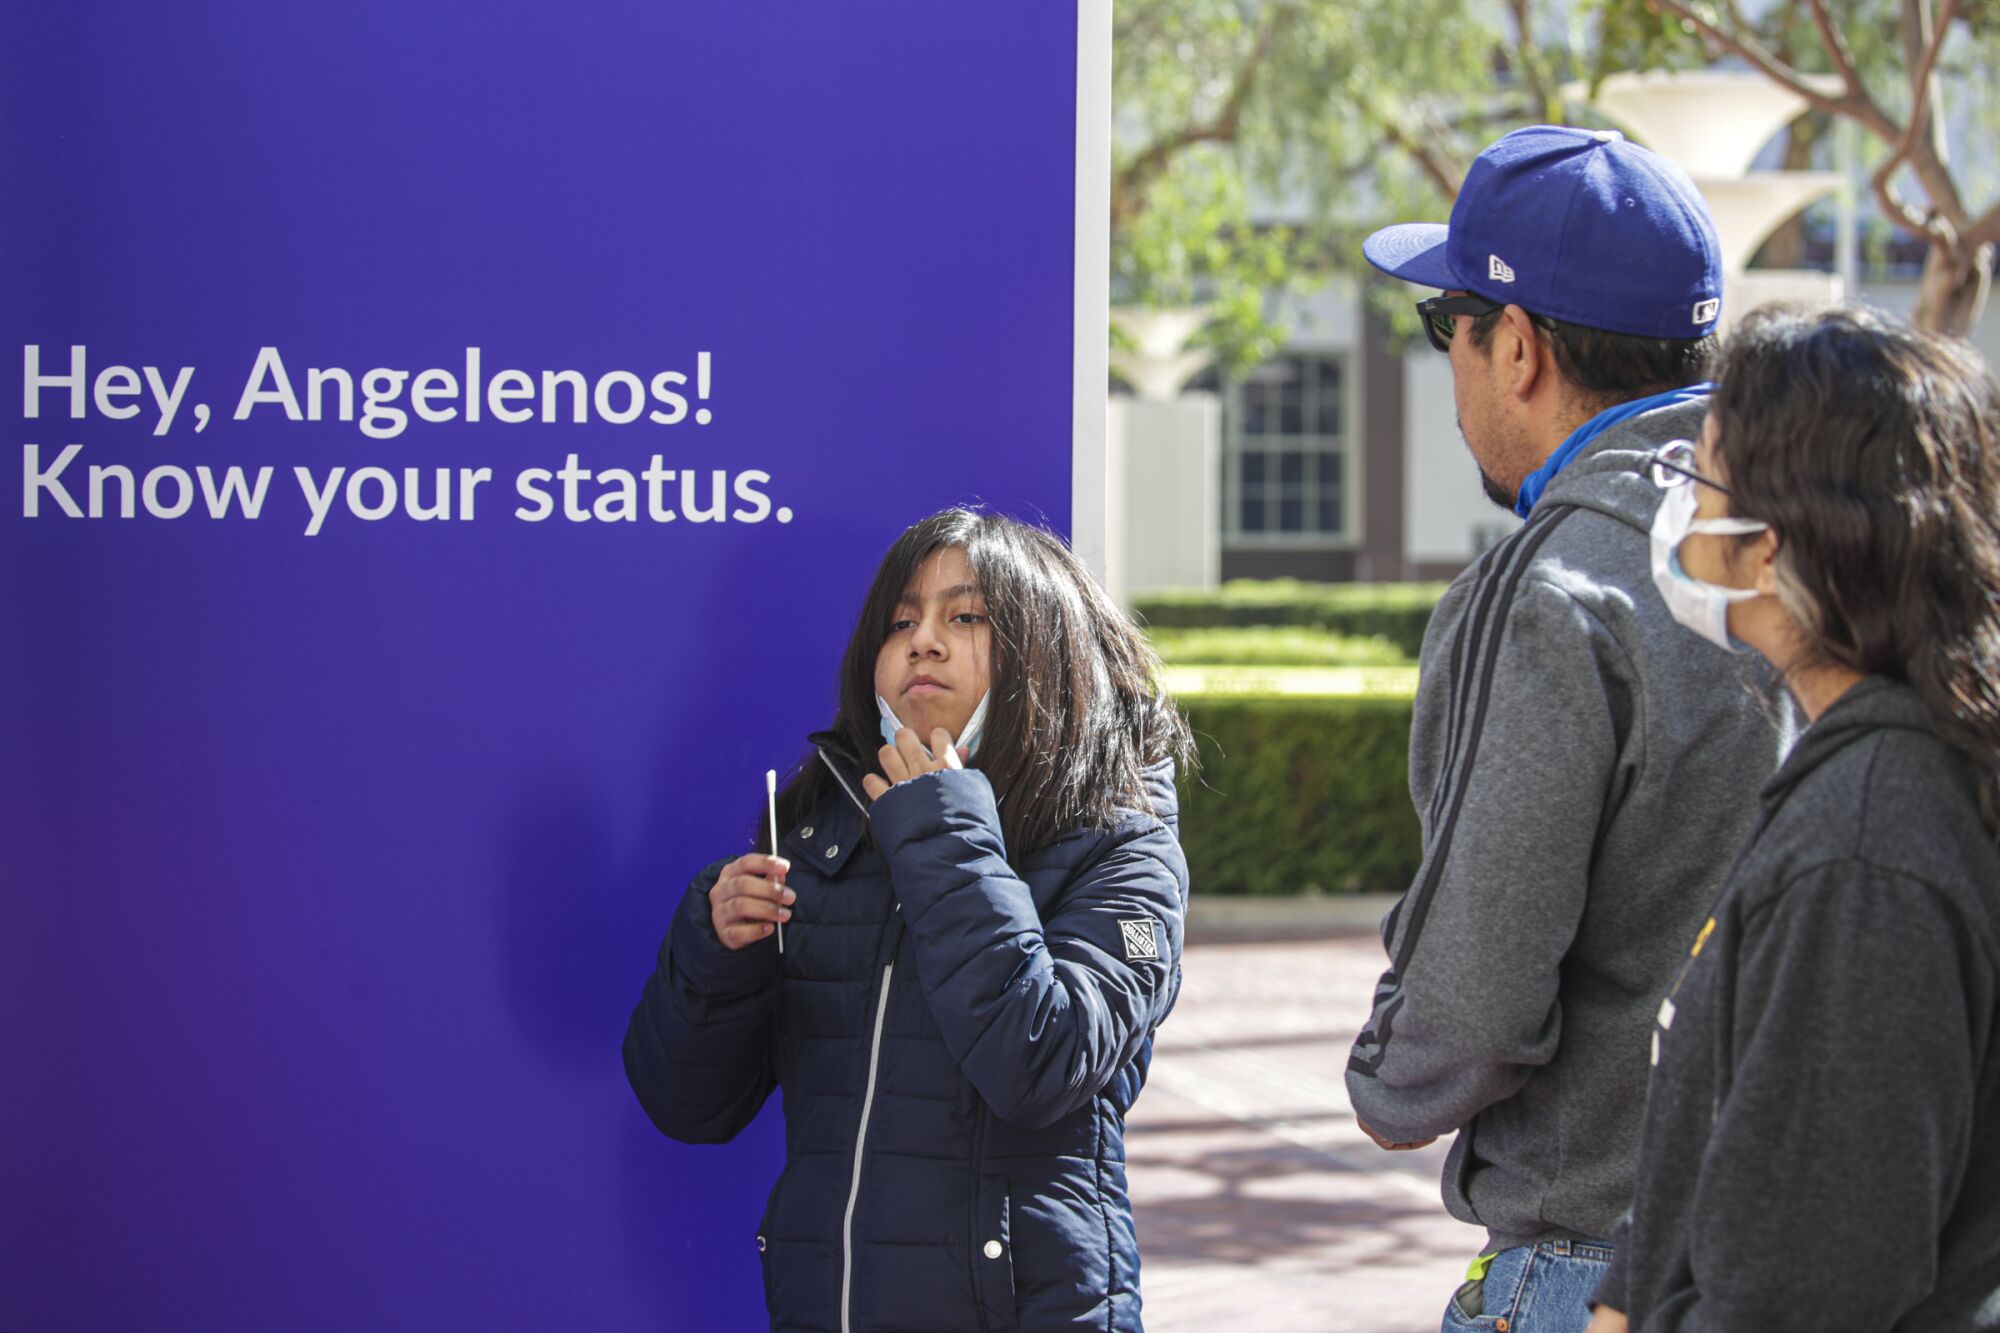 A girl, standing in front of a sign that says "Hey, Angelenos! Know your status," holds a test swab.